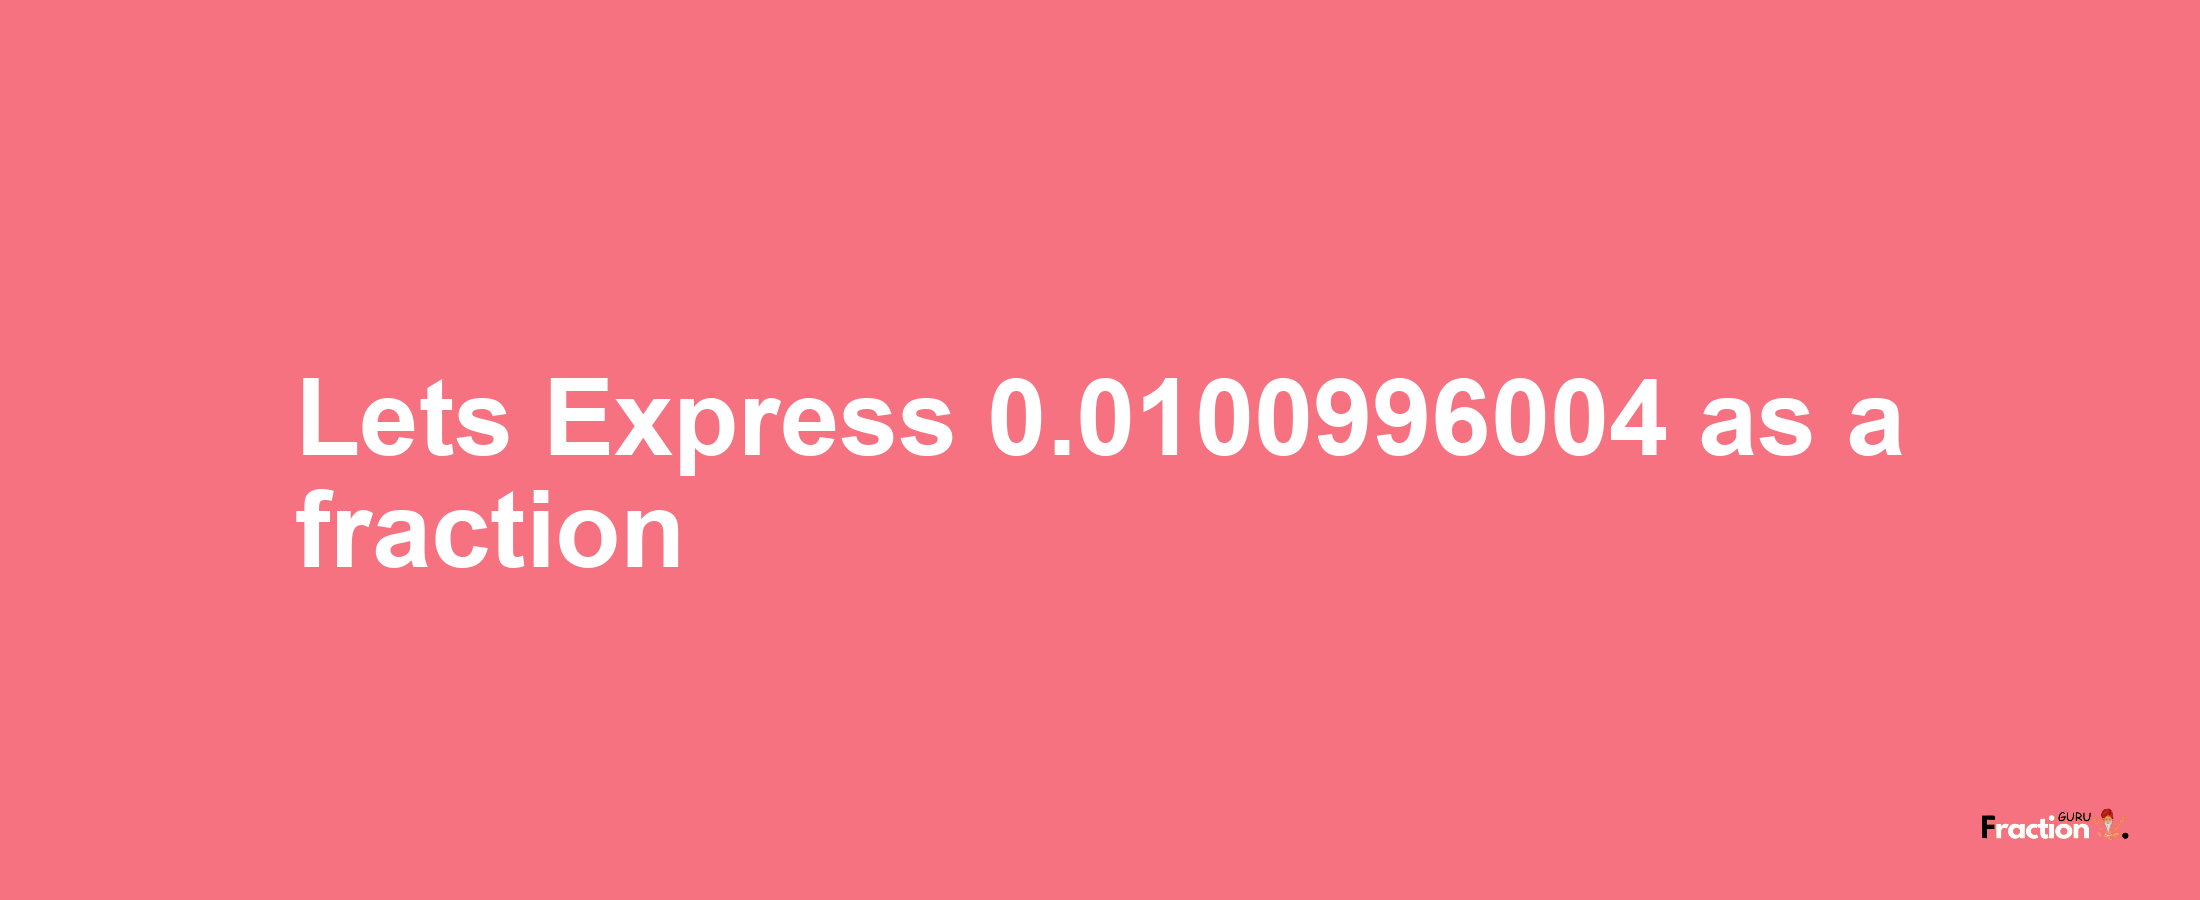 Lets Express 0.0100996004 as afraction